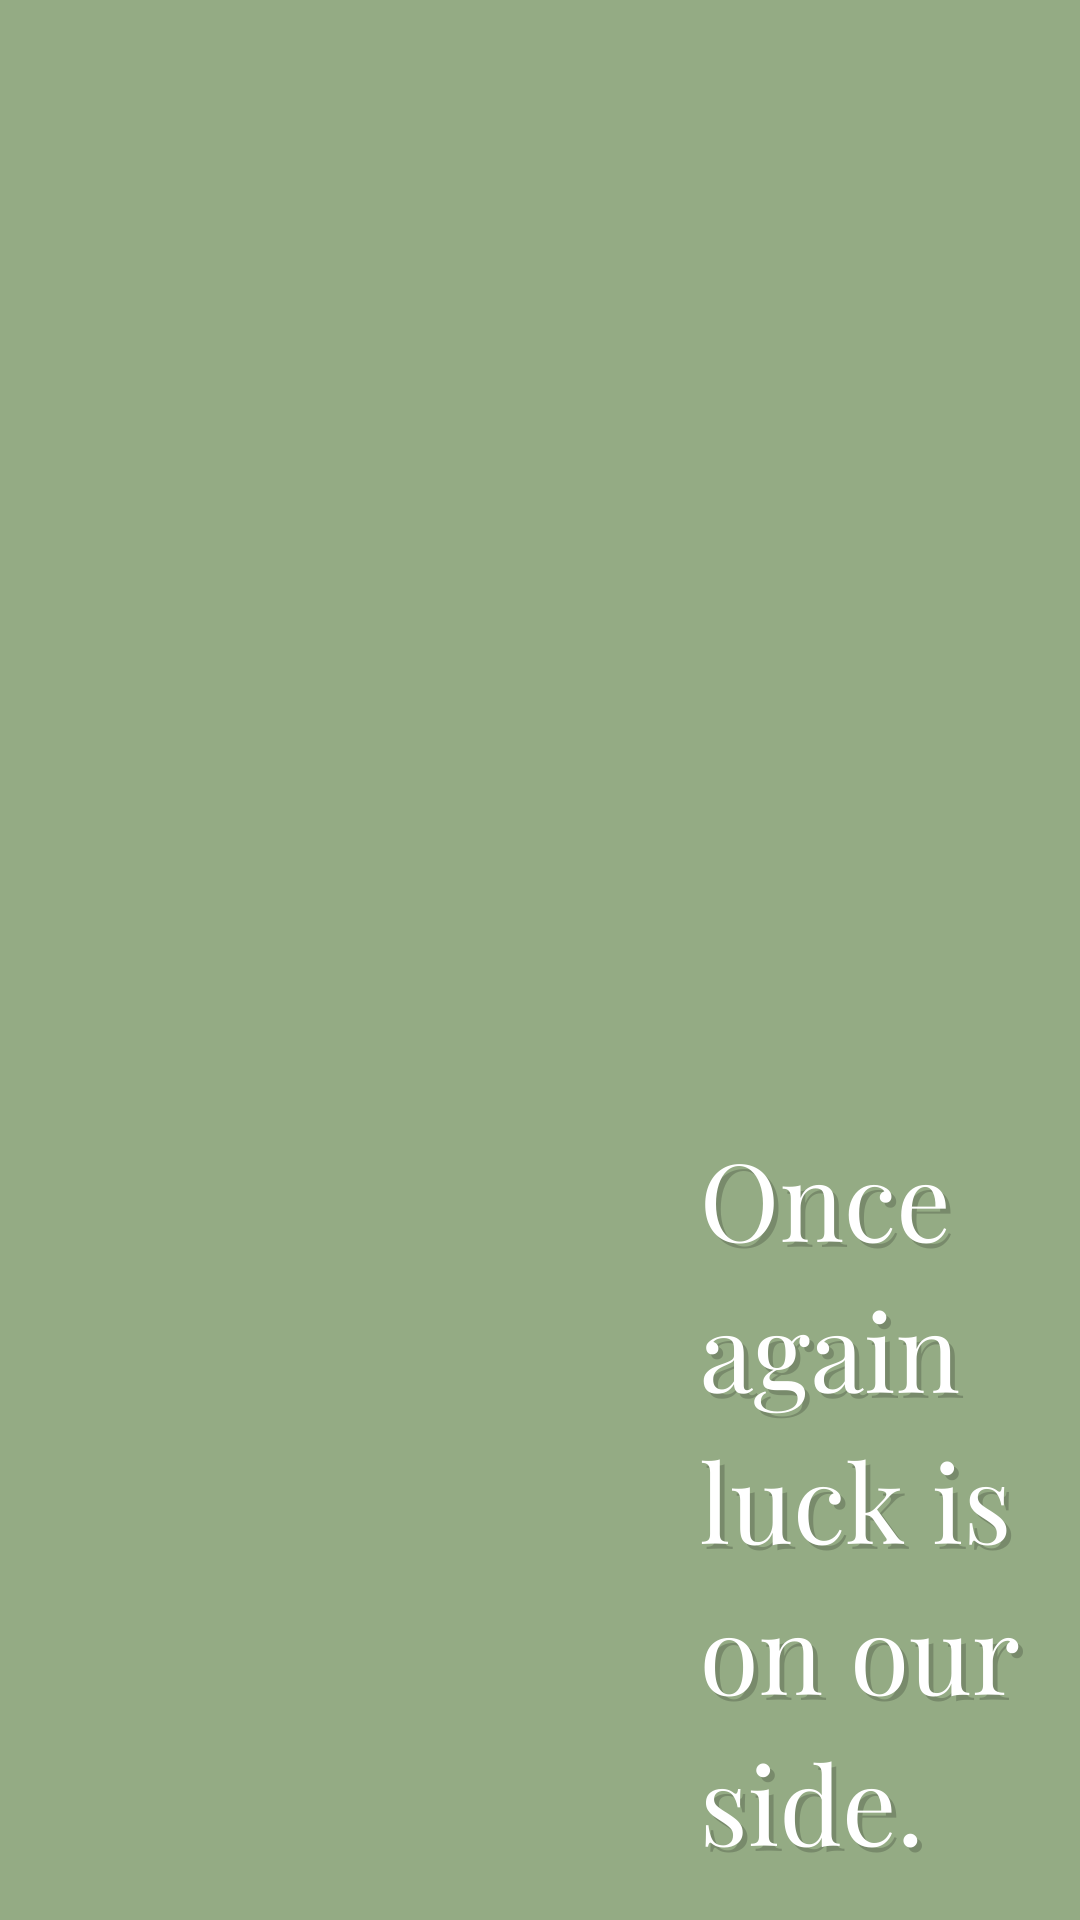 Luck Quotes Green Aesthetic Sage Wallpaper Motivational Quotes Green Phone Wallpaper Sage Green. Sage Green Wallpaper, Mint Green Aesthetic, Green Quotes